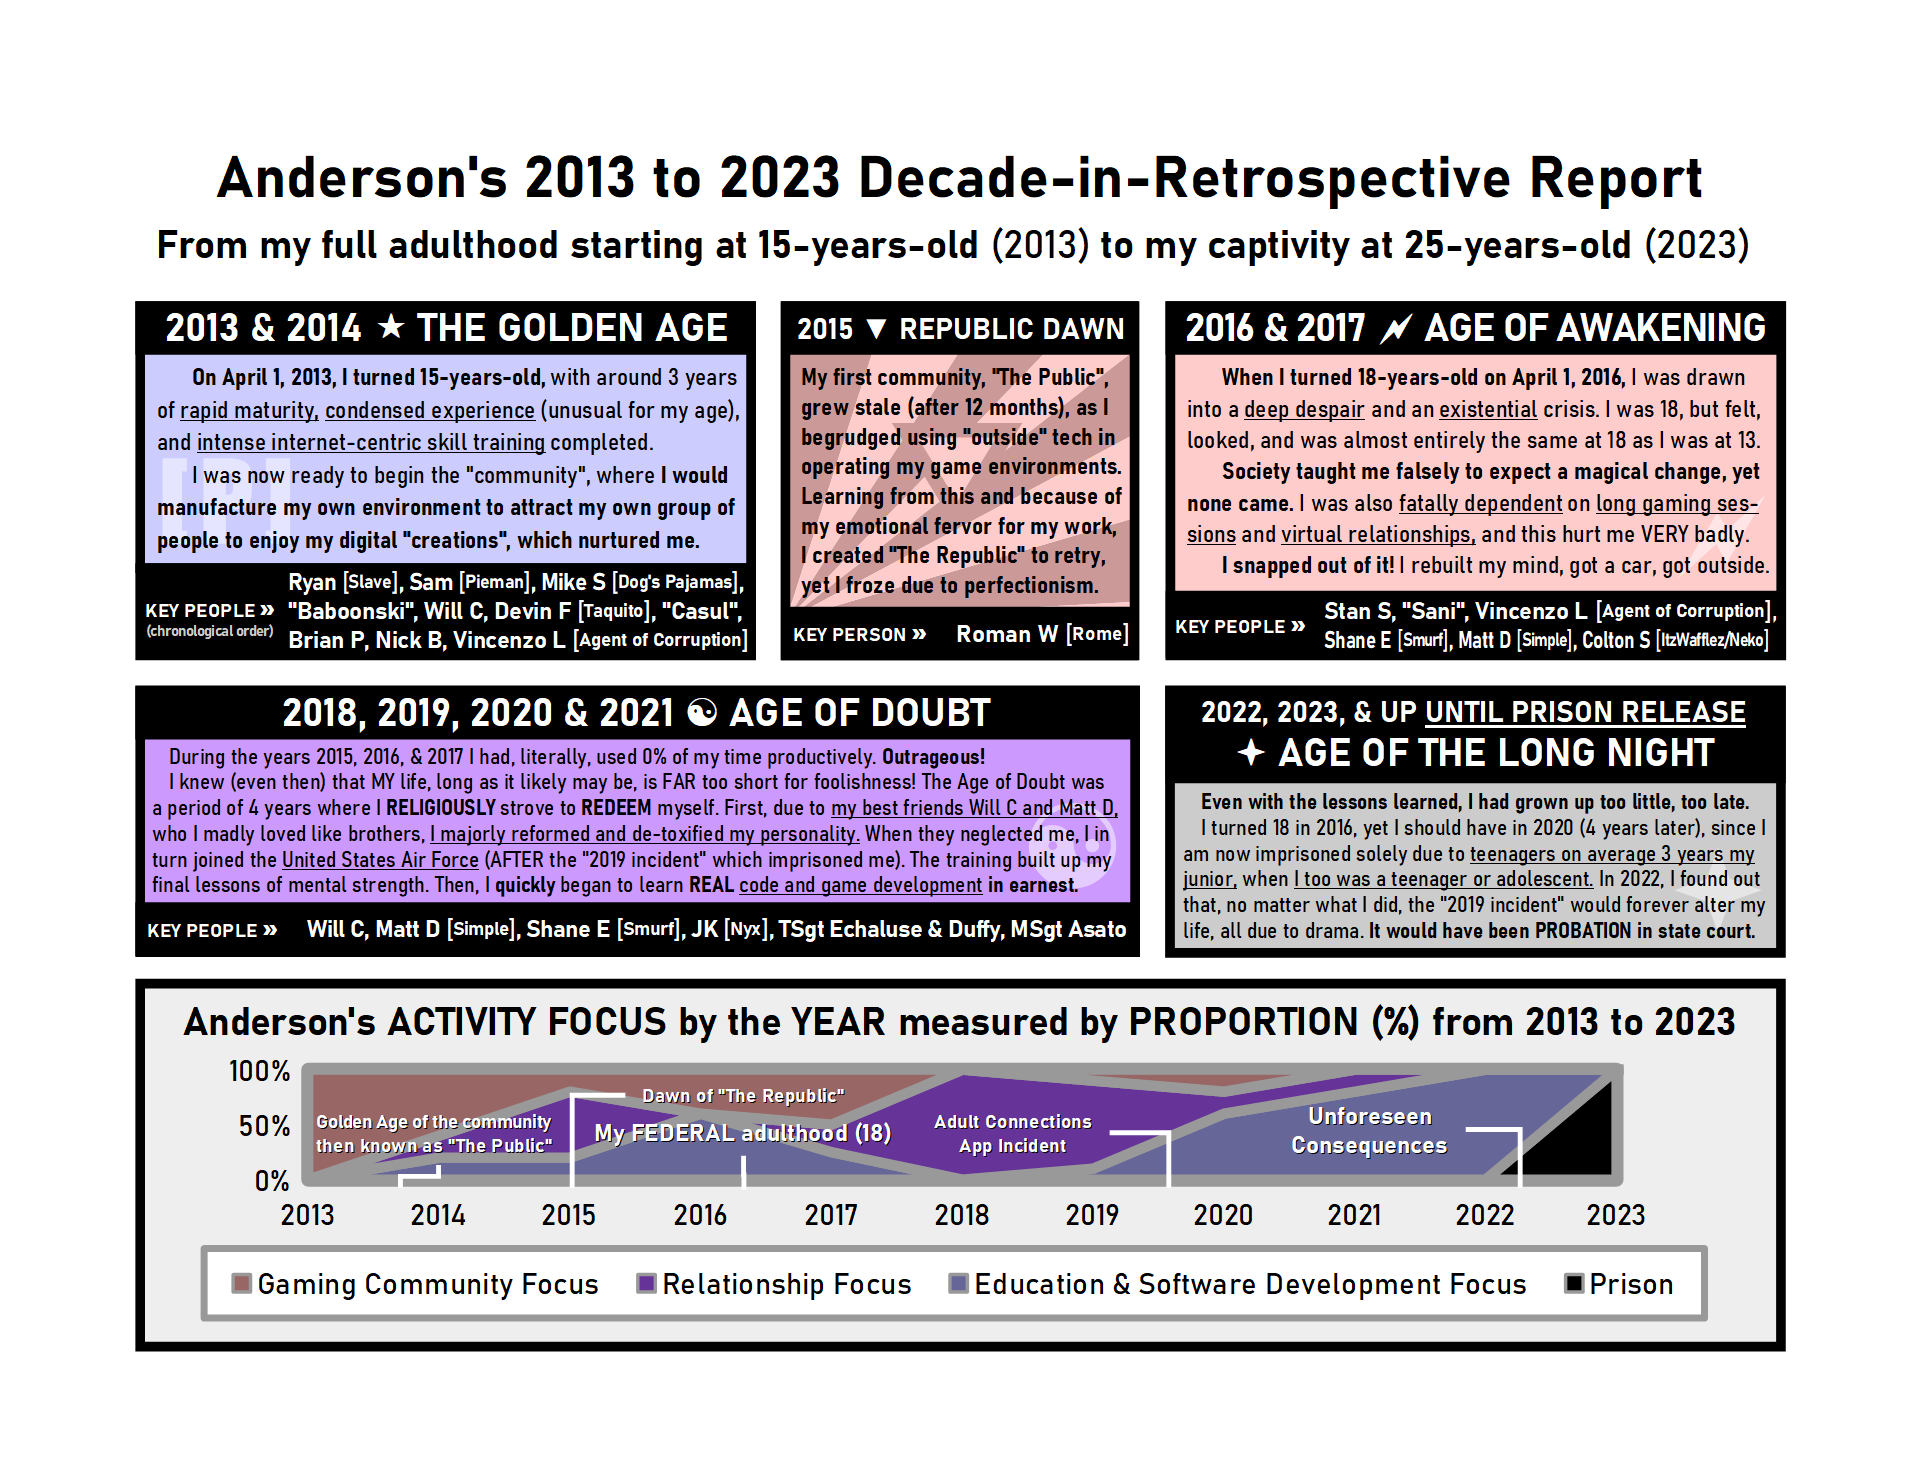 anderson-2013-to-2023-decade-in-retrospective-report.png